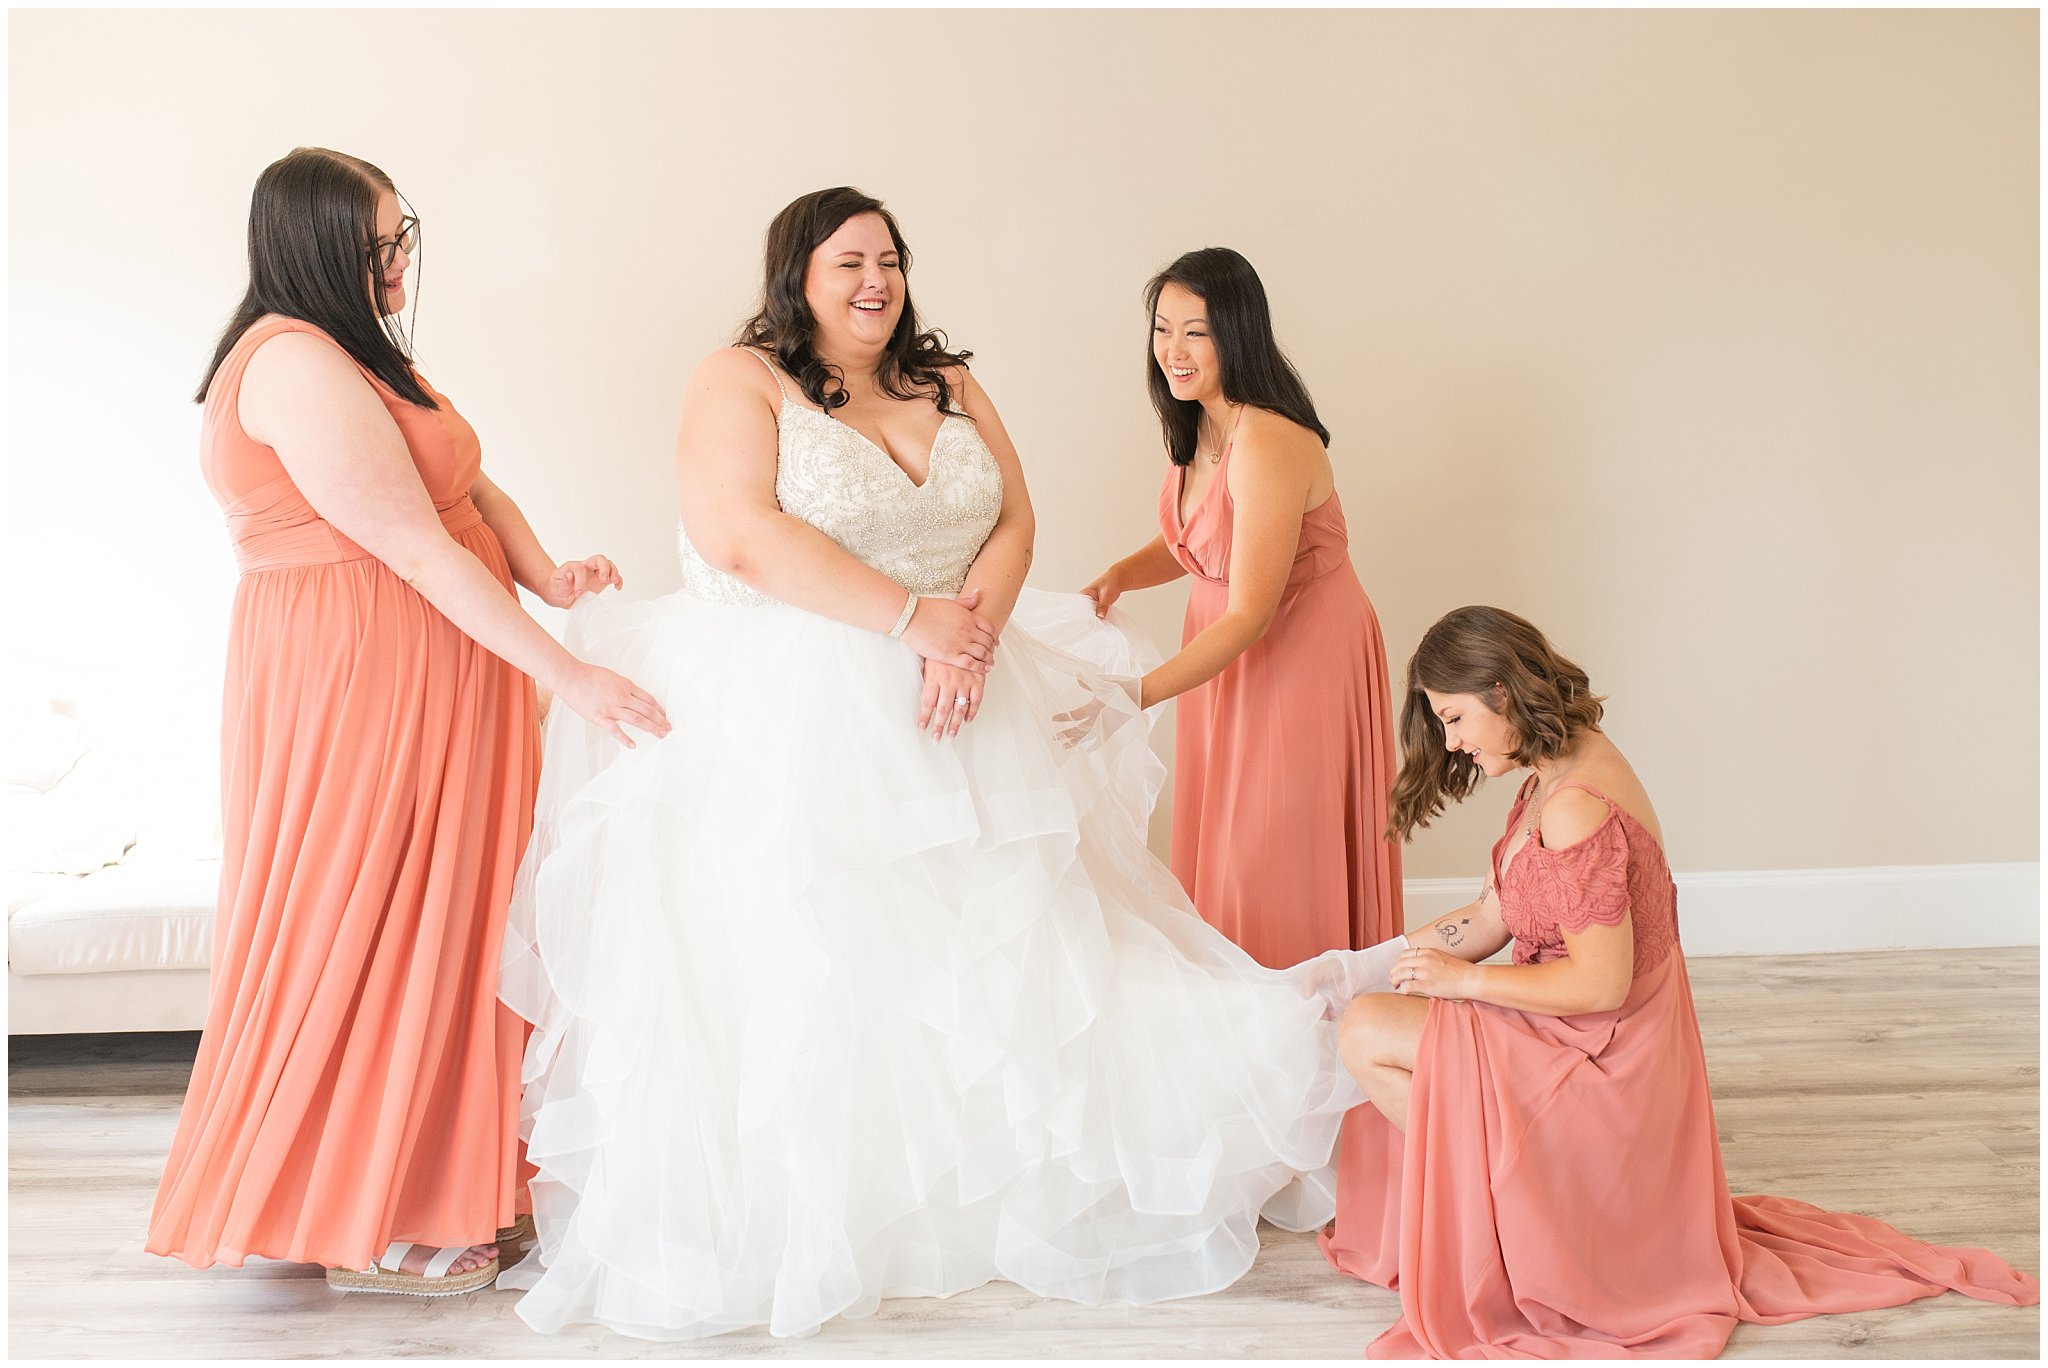 Bride getting ready with bridesmaids in salmon pink dresses | Green and Salmon Pink Utah Wedding | Oak Hills | Jessie and Dallin Photography